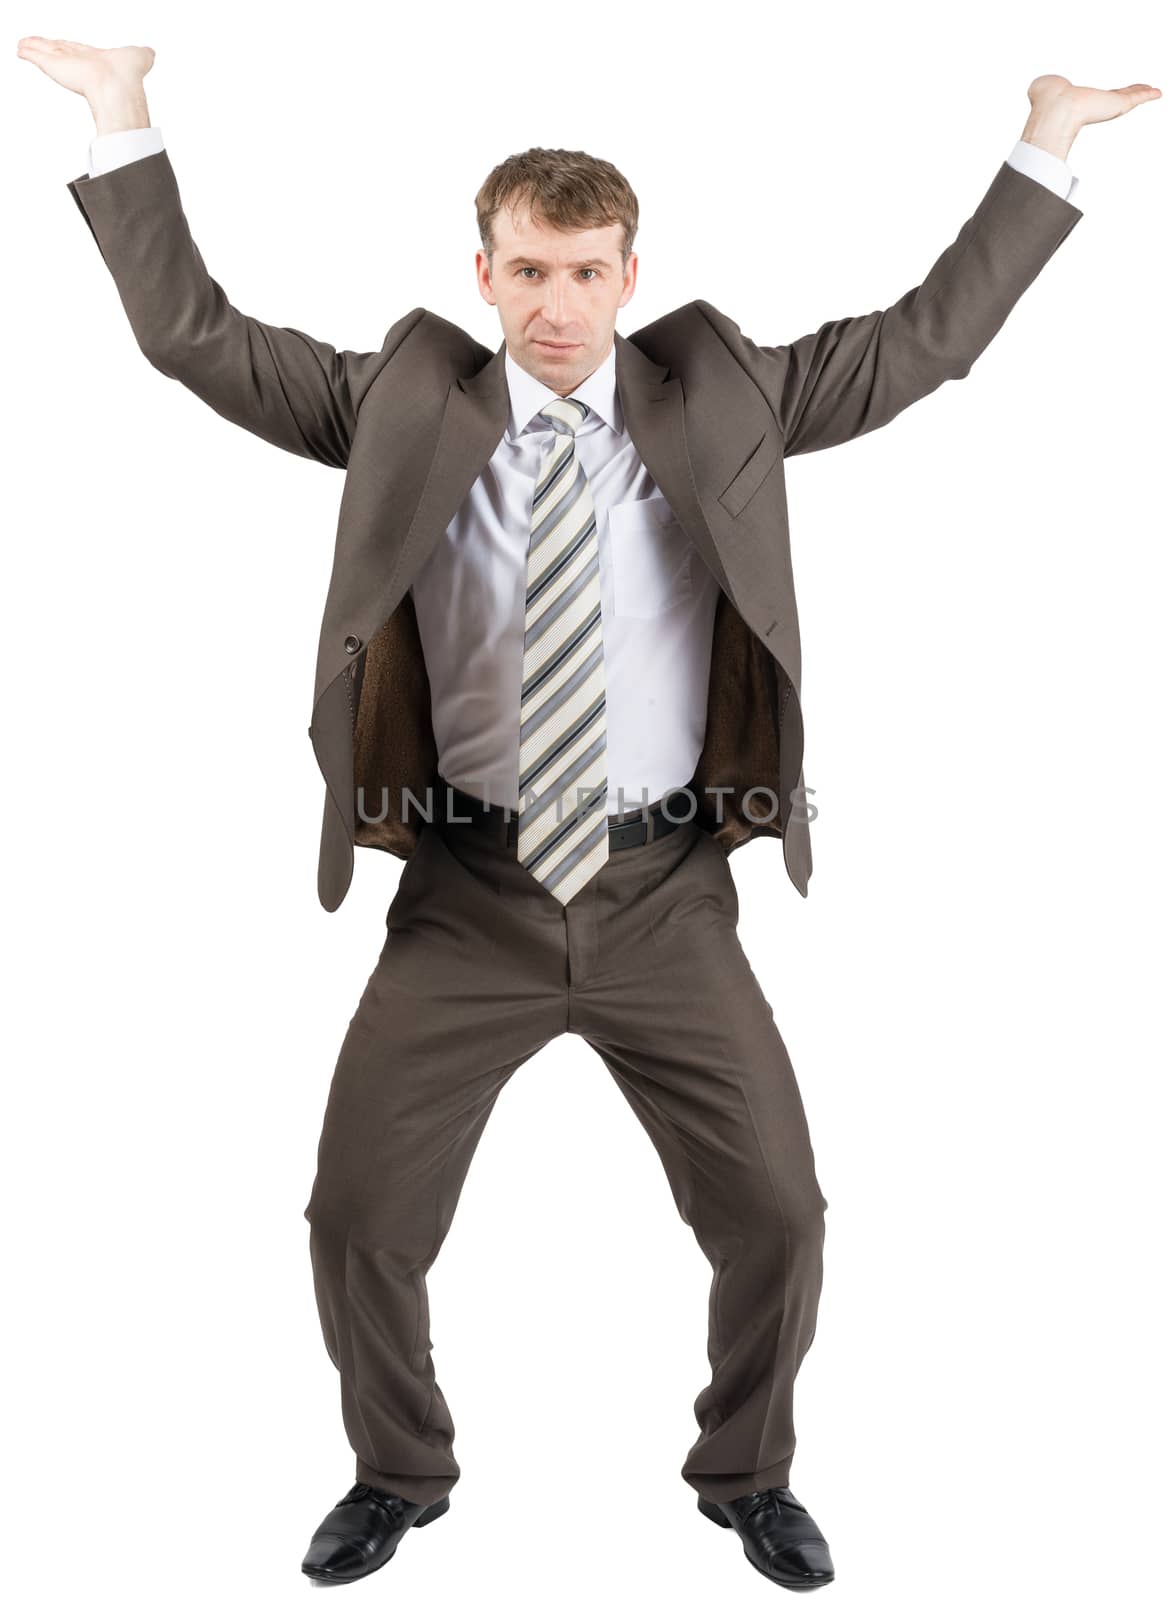 Businessman holding arms up by cherezoff